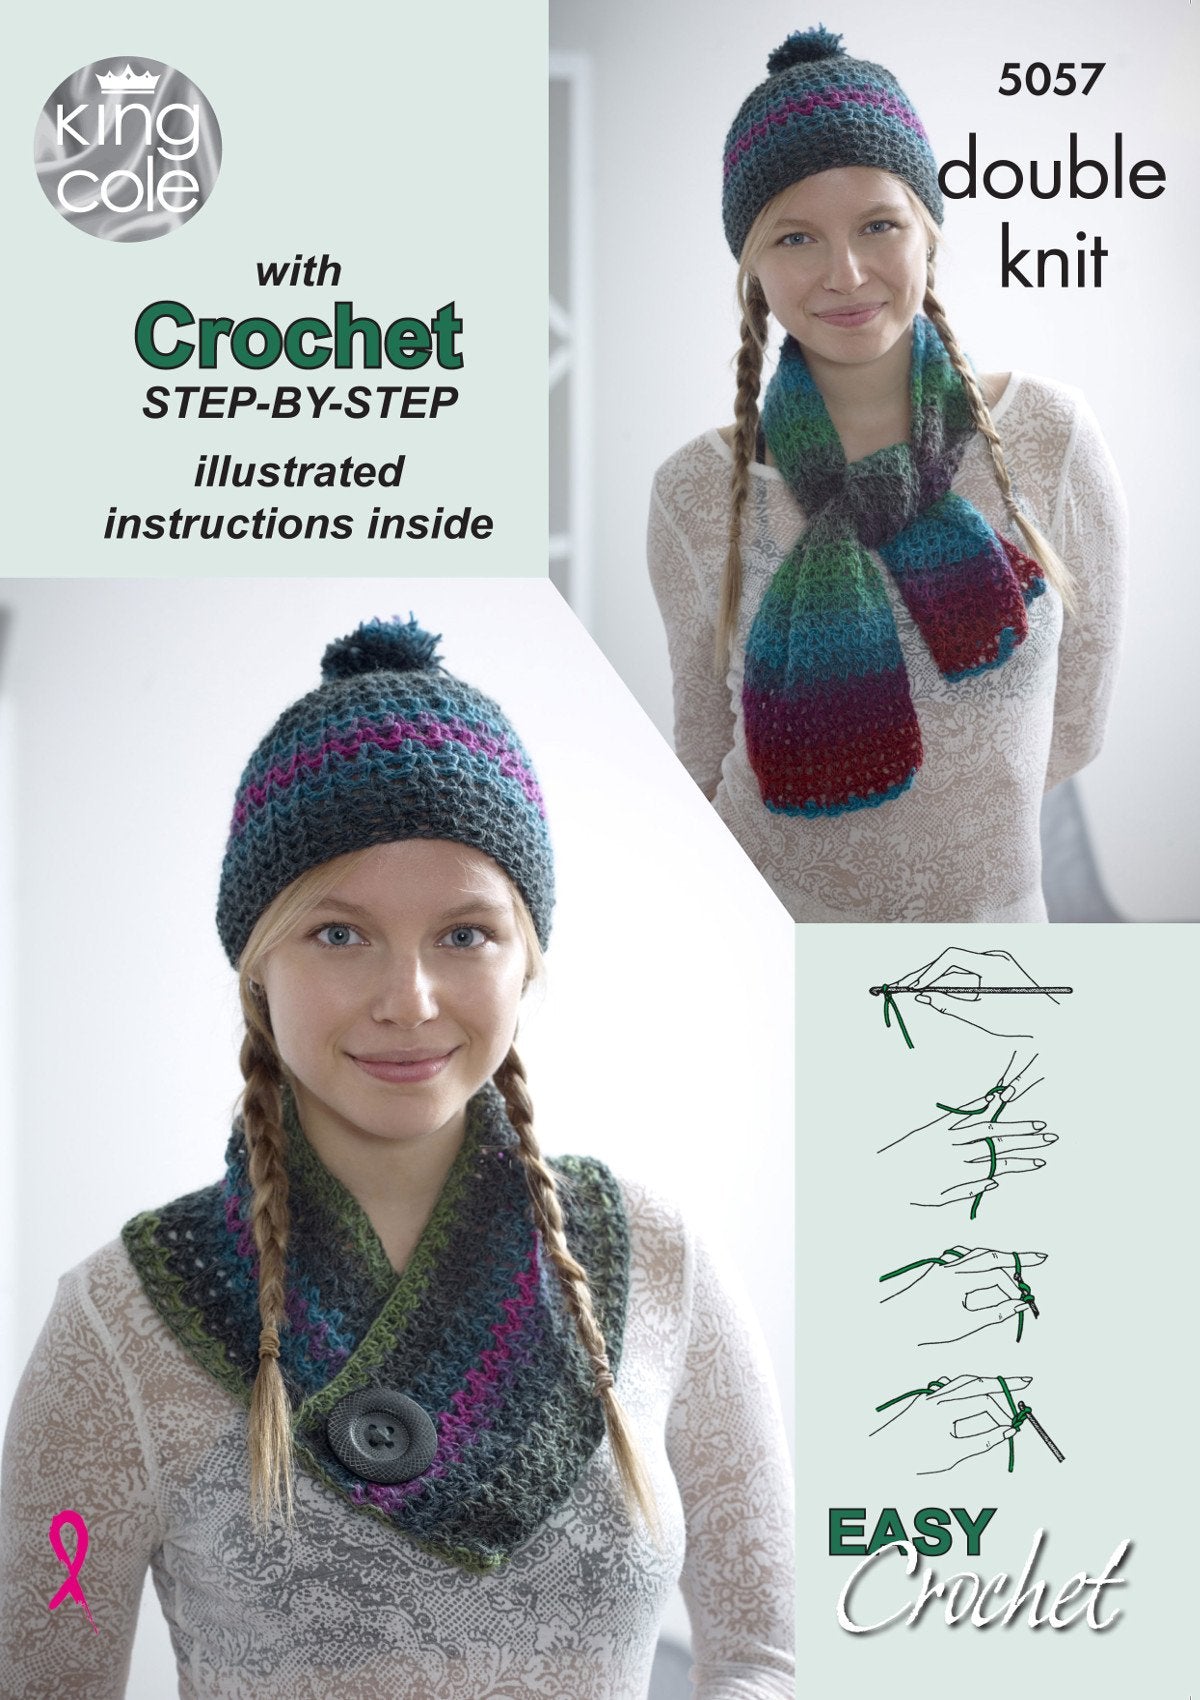 A picture of Leaflet 5057 - King Cole Riot DK - Crochet, by King Cole, on a white background.